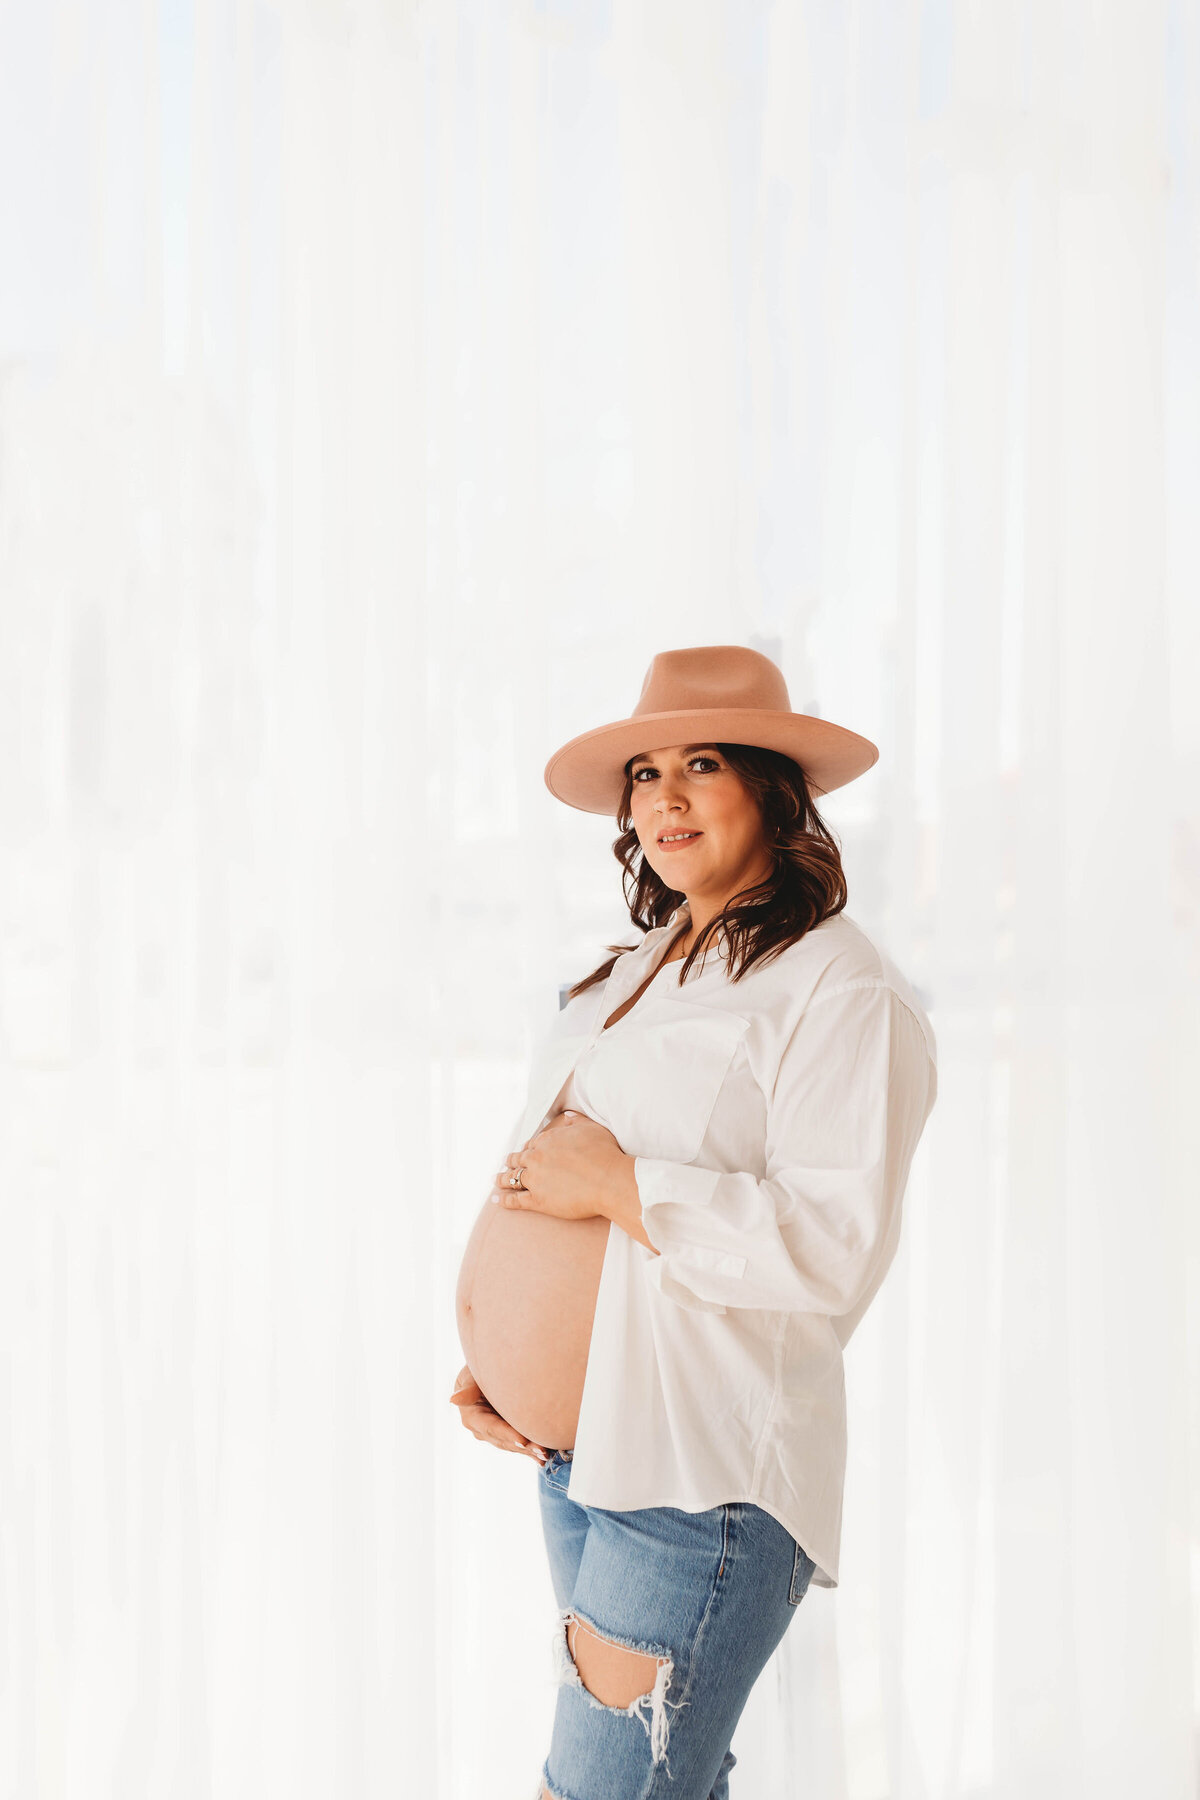 Pregnant mom in a white button up shirt with jeans and a hat holds her bare belly.